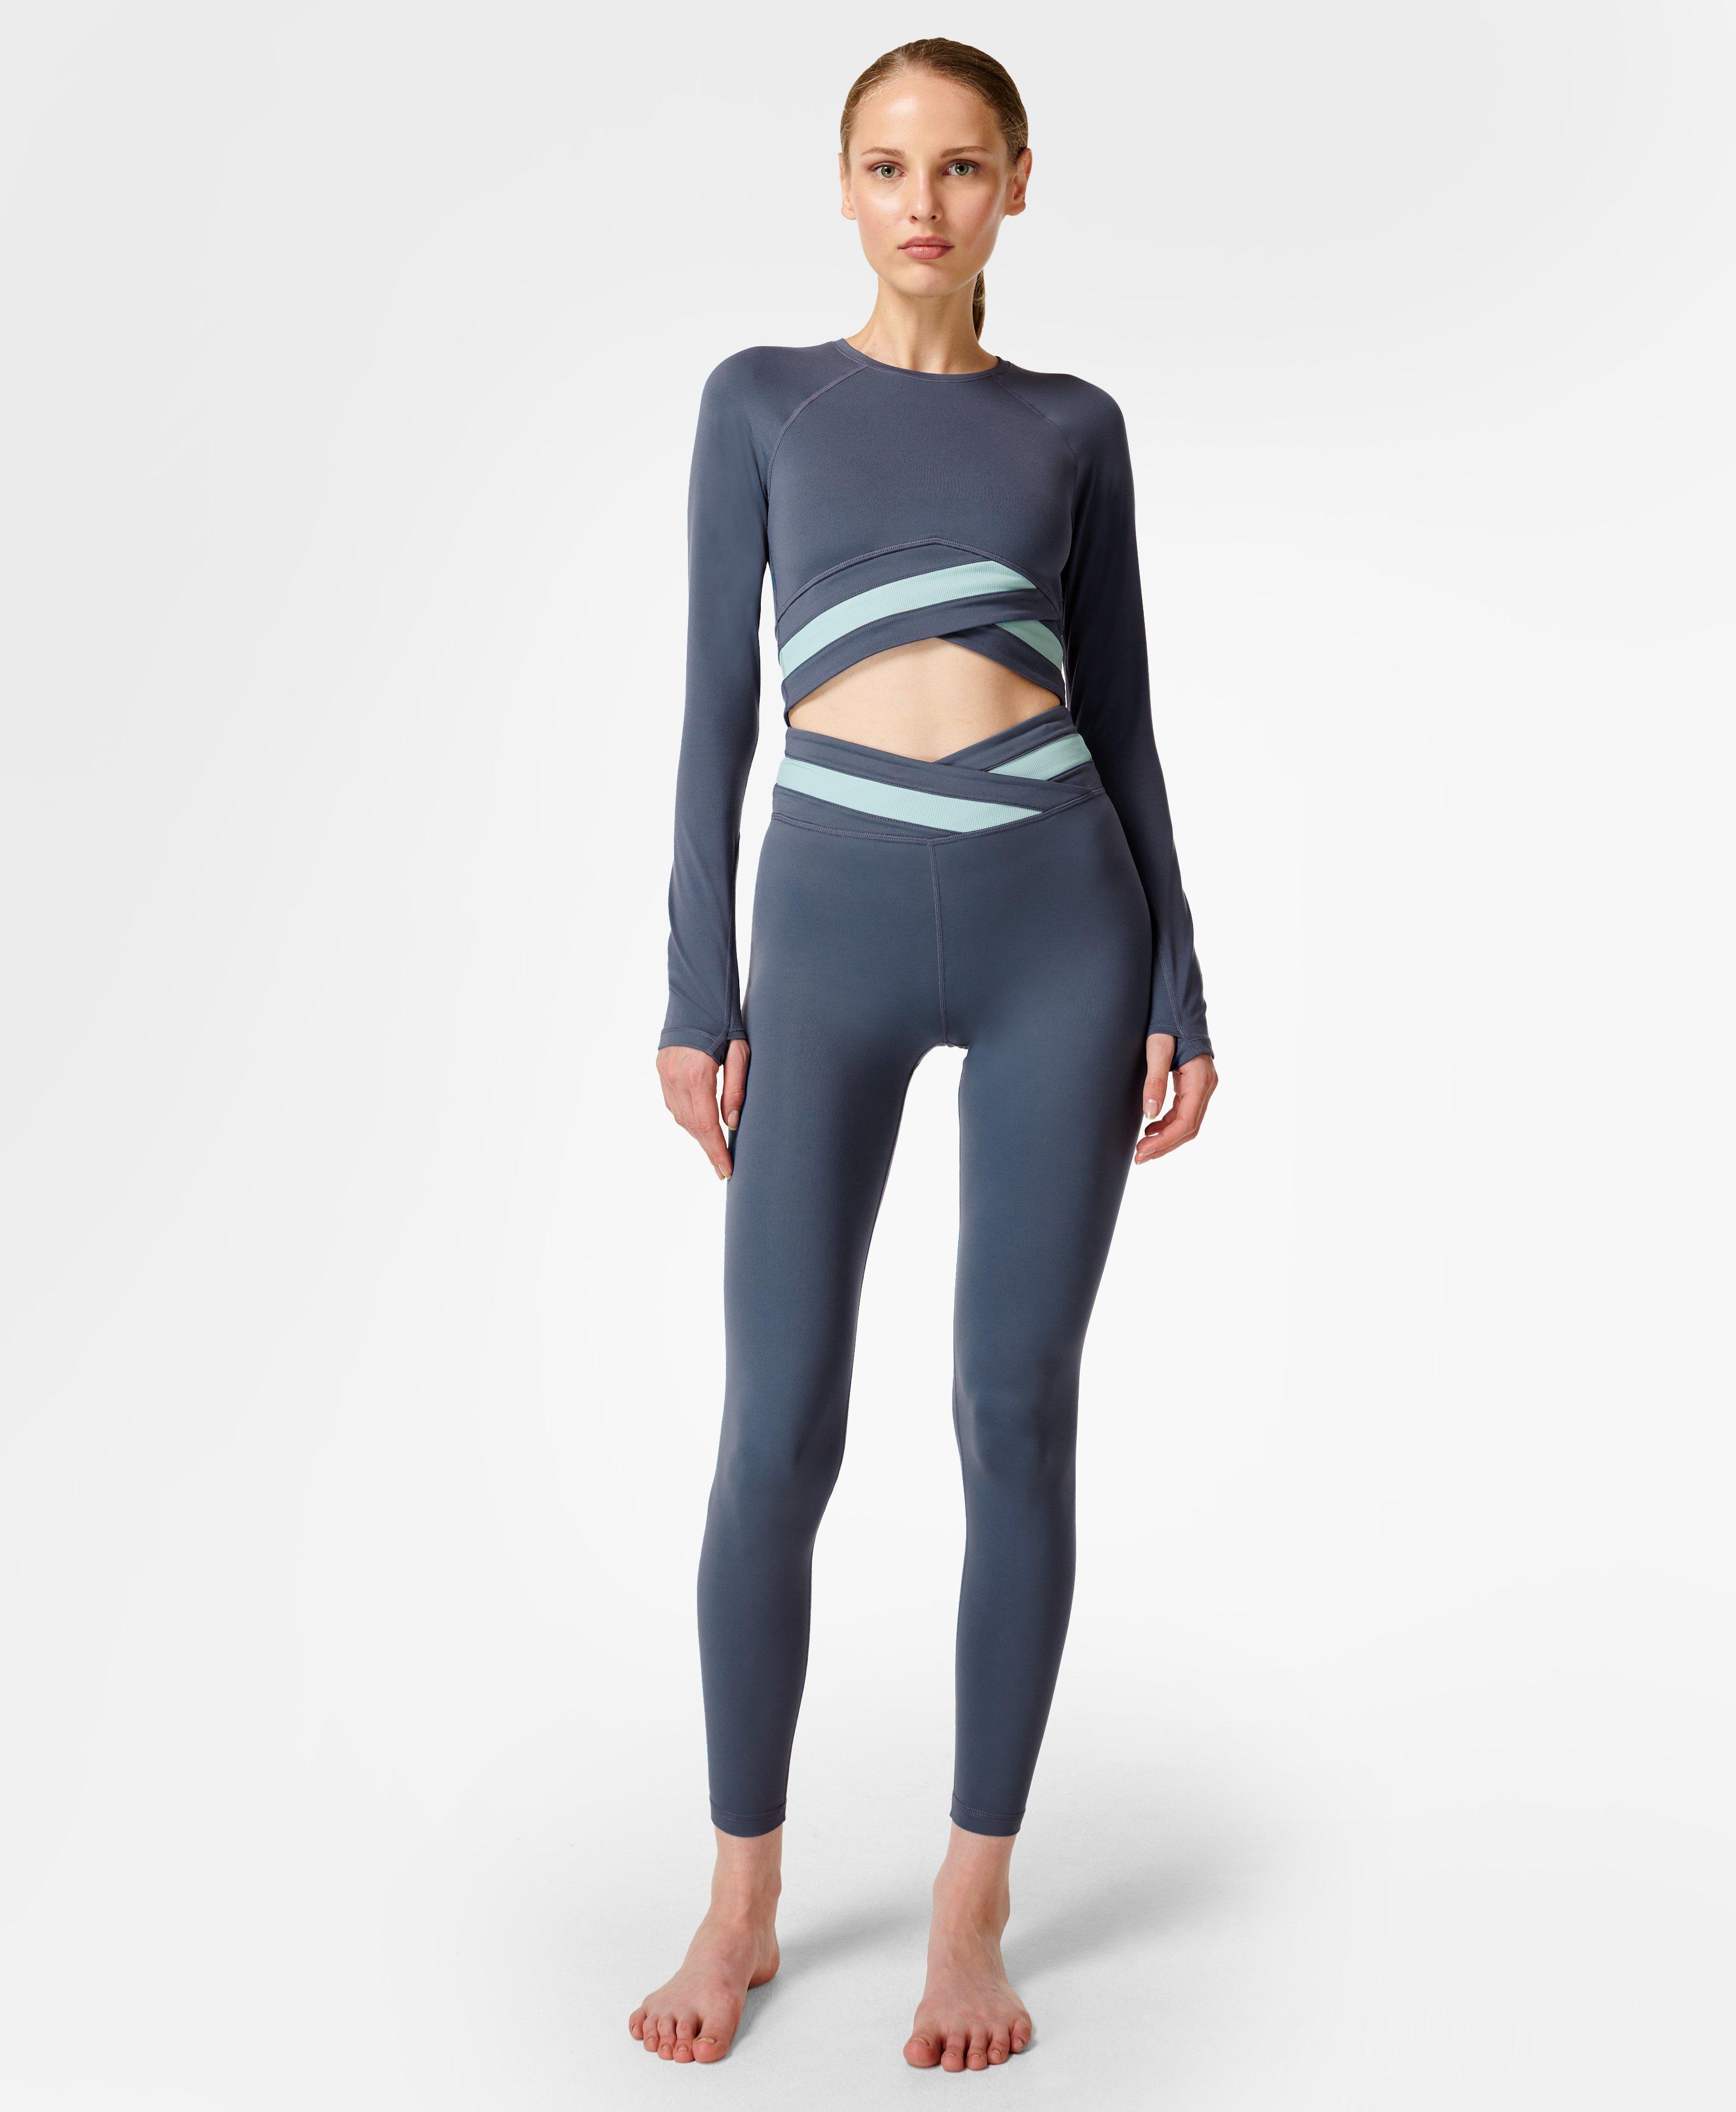 ALO YOGA Barre Long-Sleeve Top - Women's for Sale, Reviews, Deals and Guides